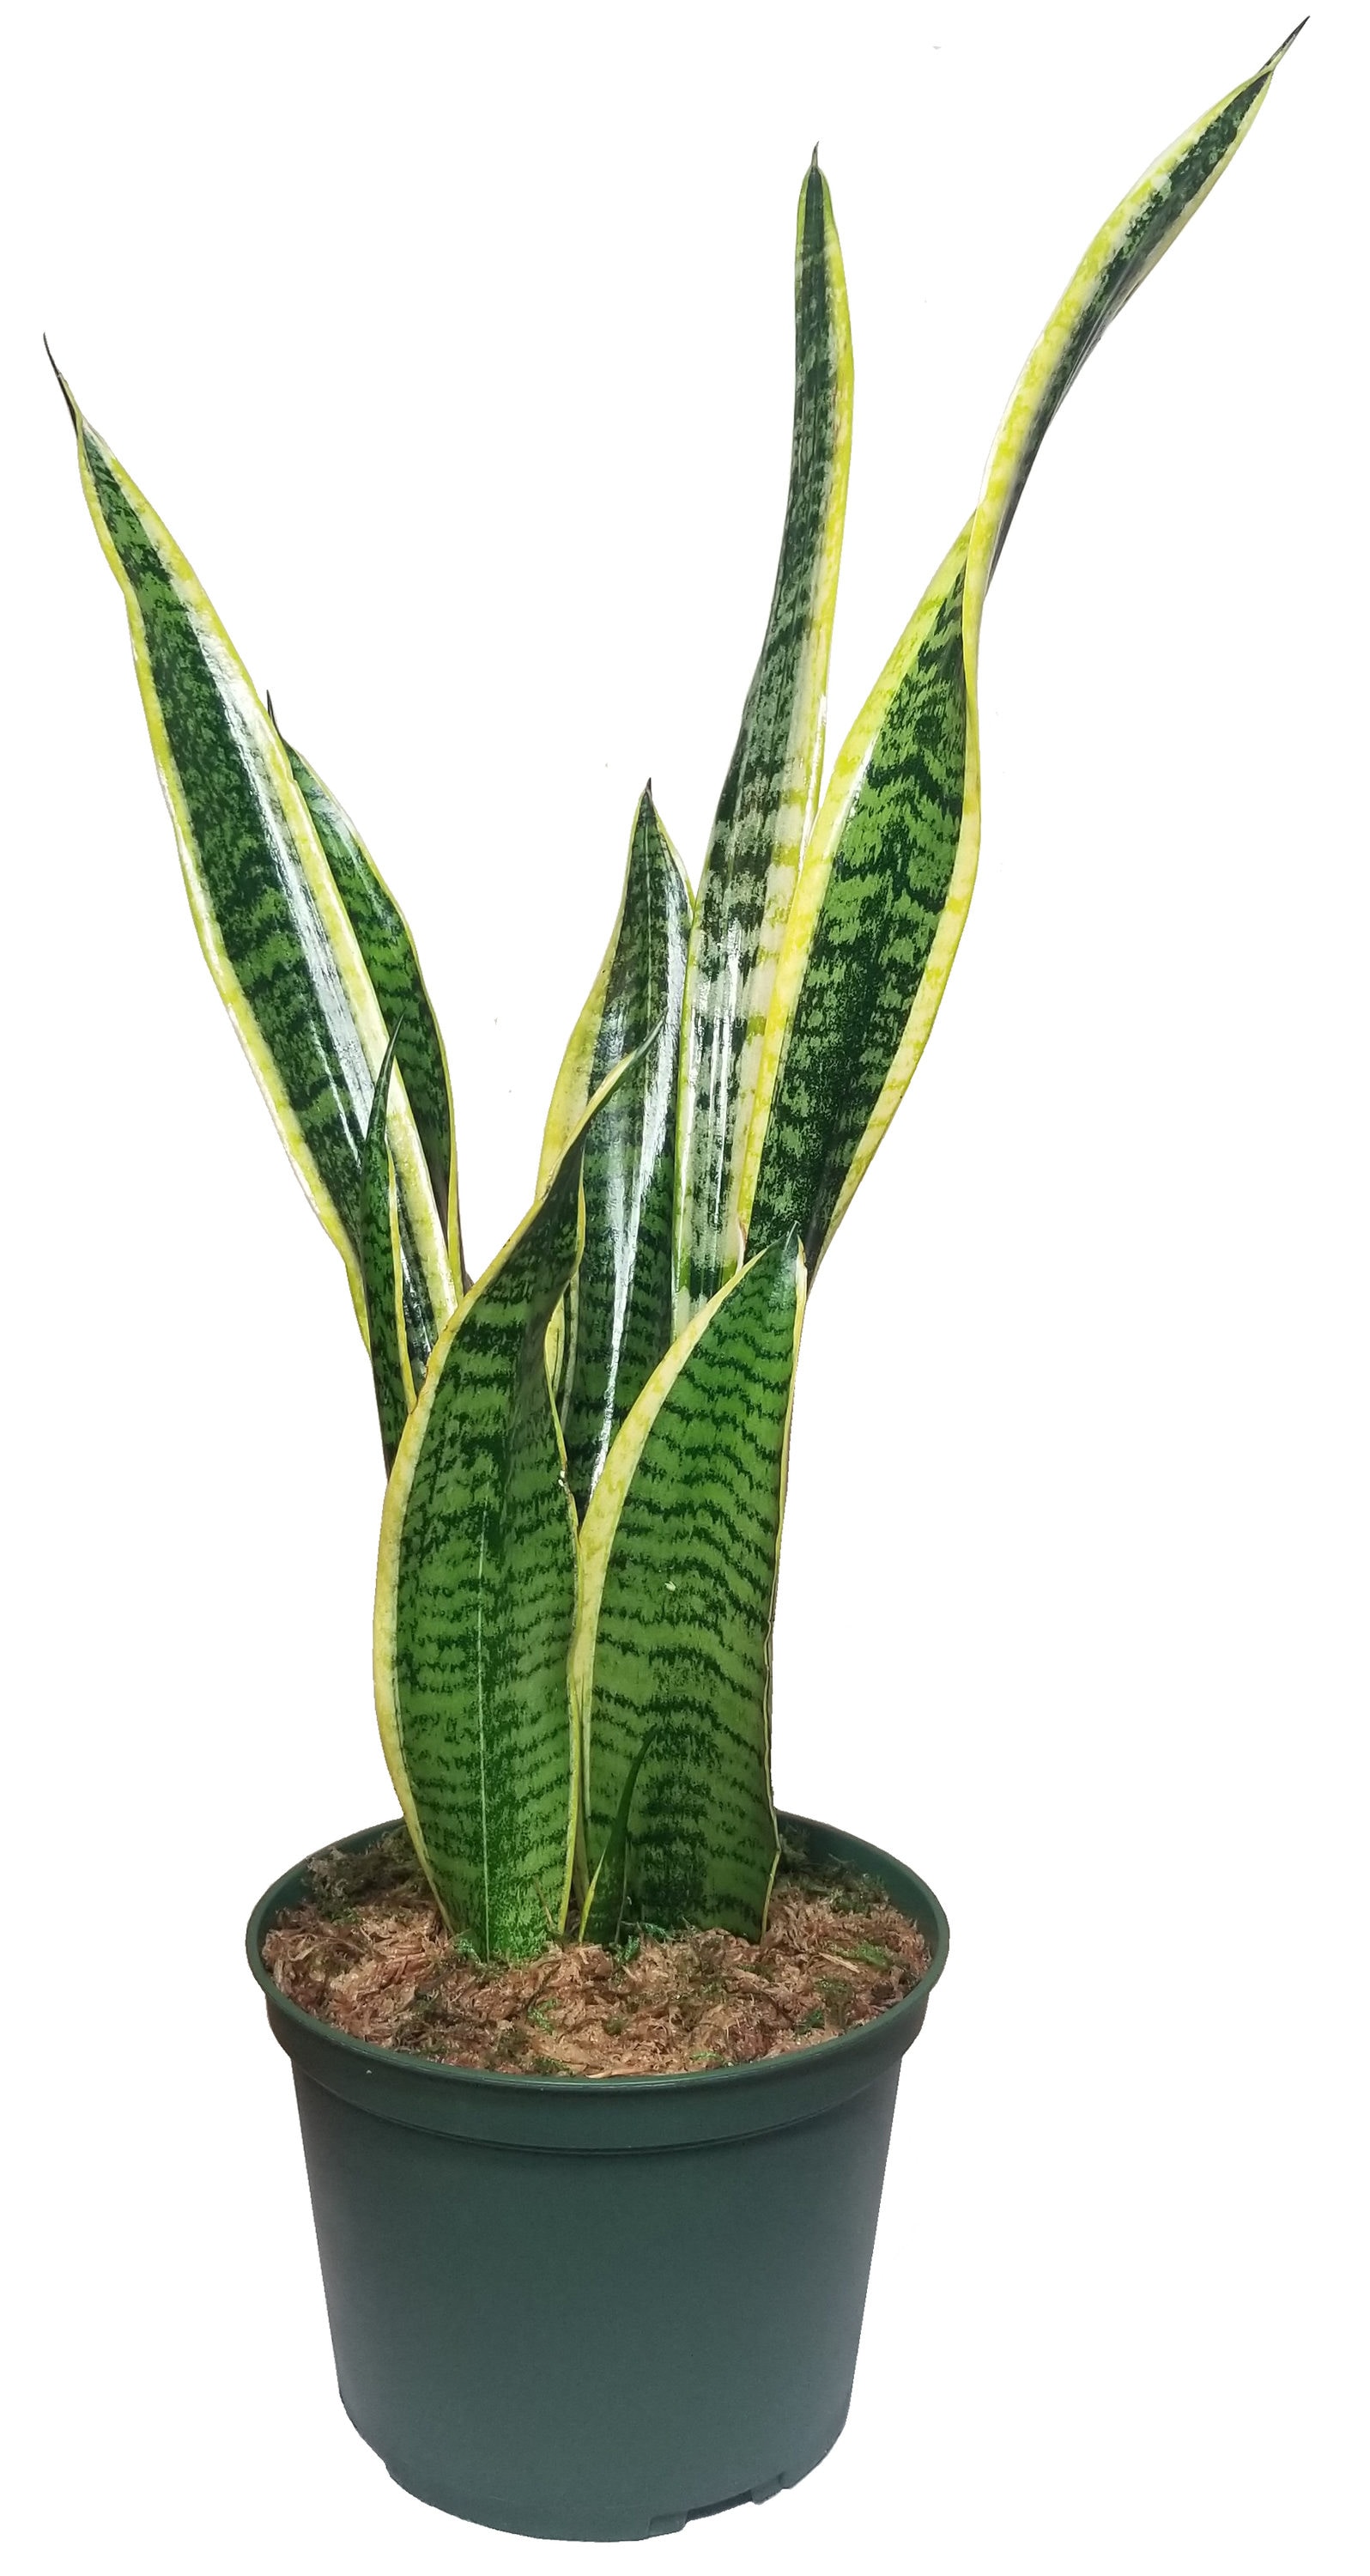 in 6cm Pot in 6cm Pot Succulent House Plant Sansevieria ehrenbergii Snake or Mother in Law Tongue Plant 